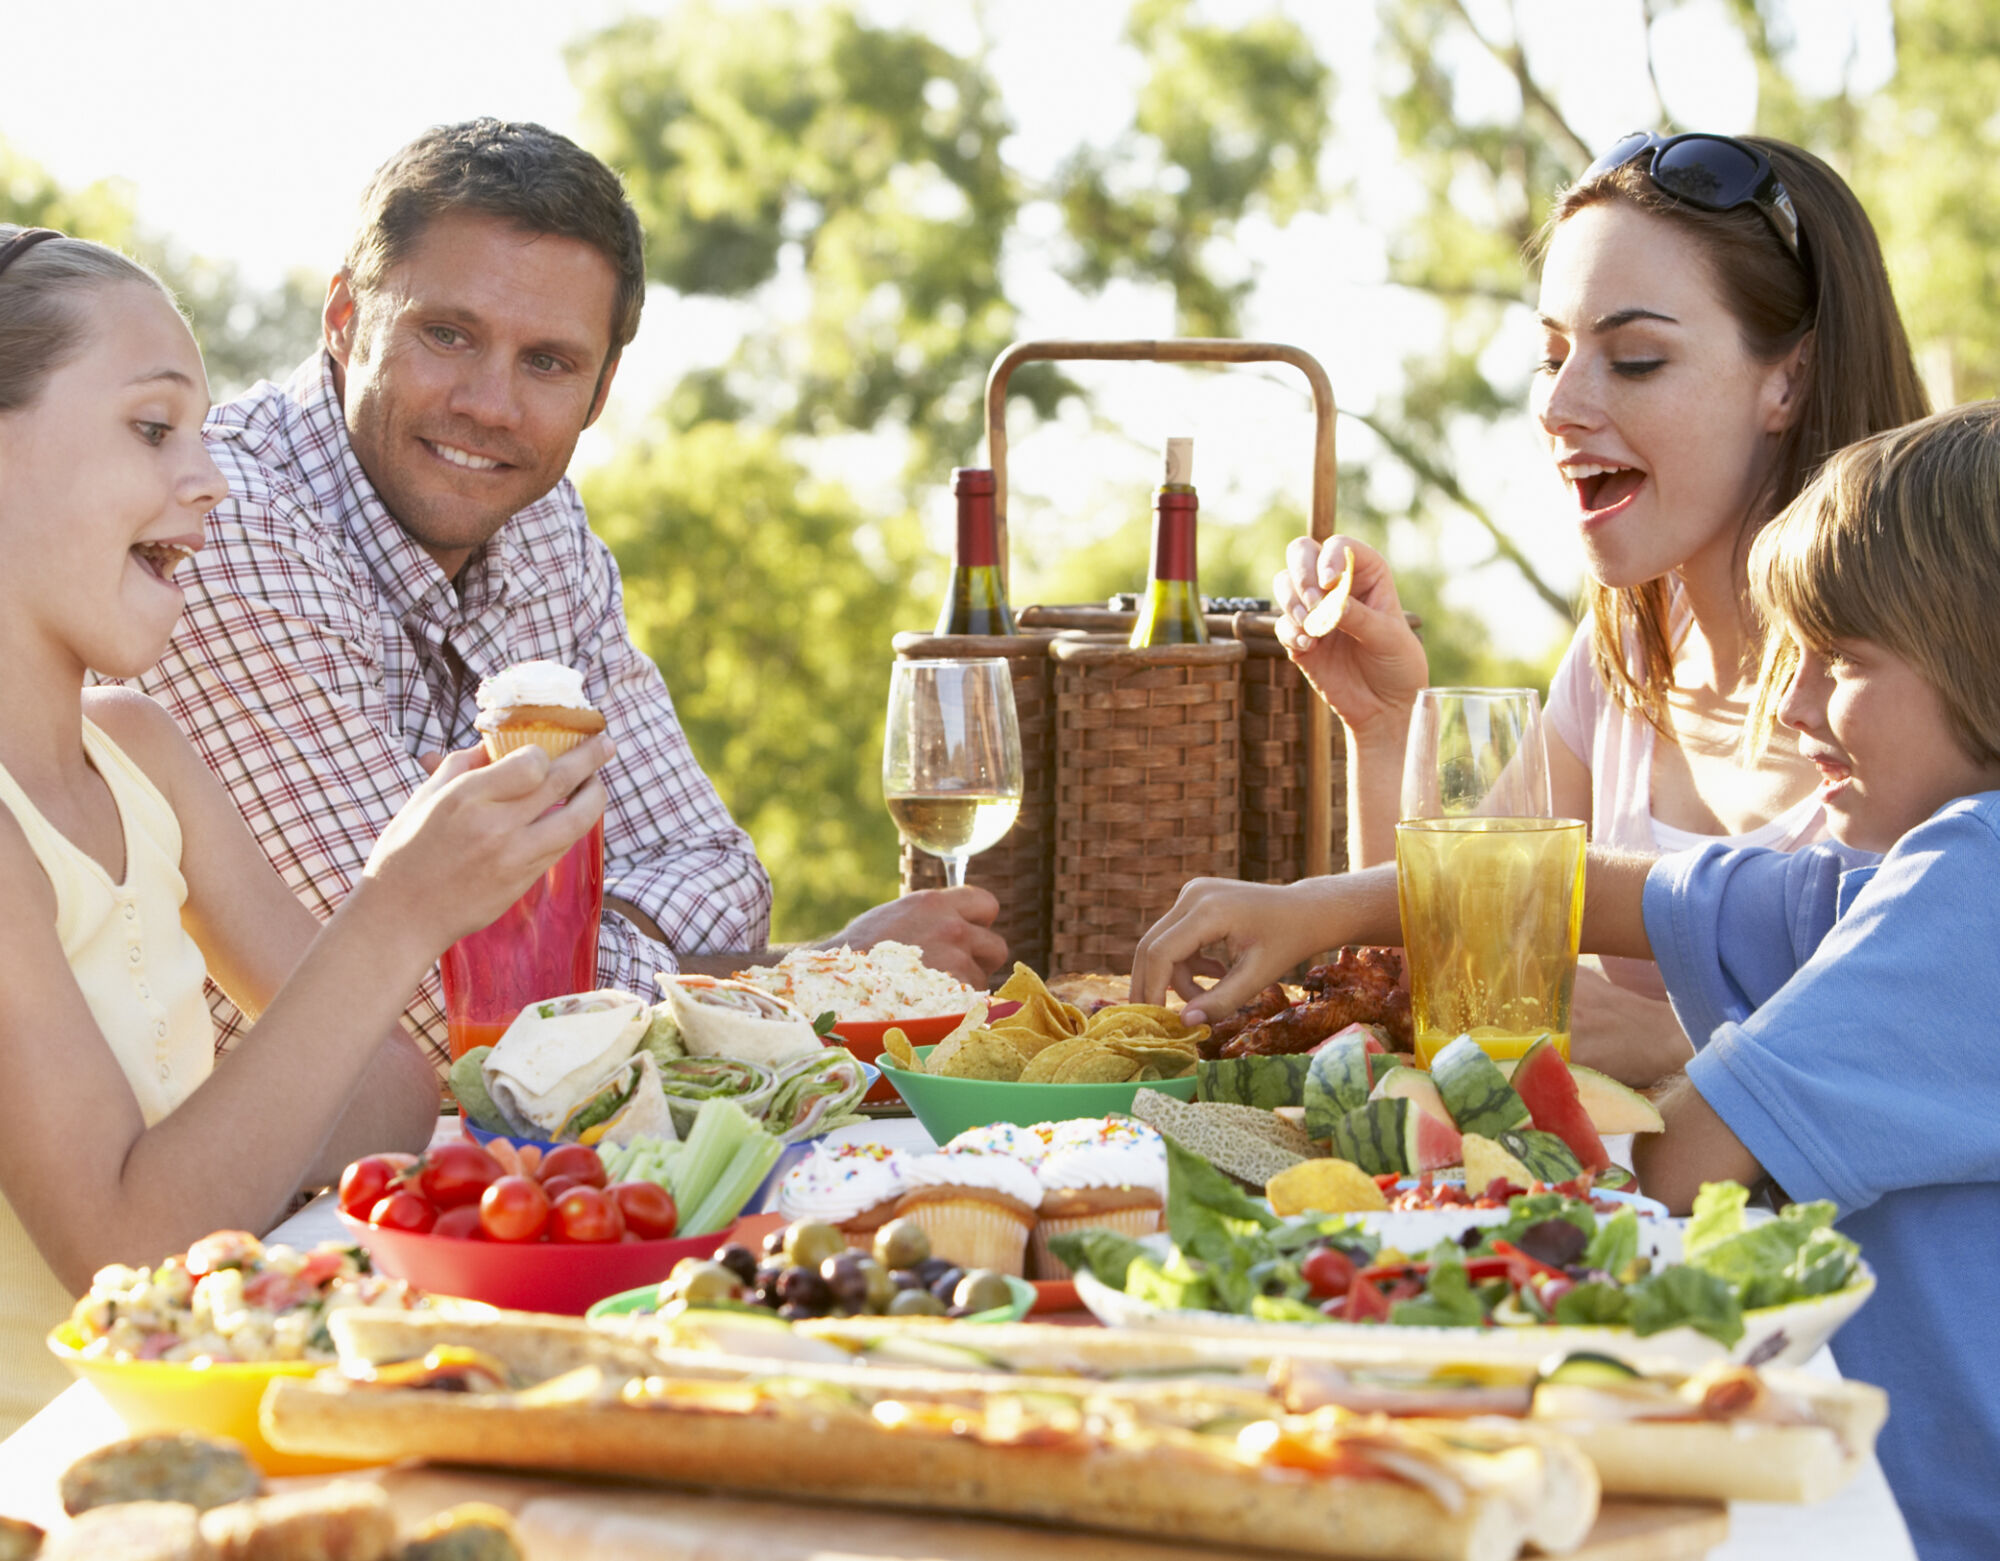 A family shares a large meal on a picnic table outdoors on a sunny day.